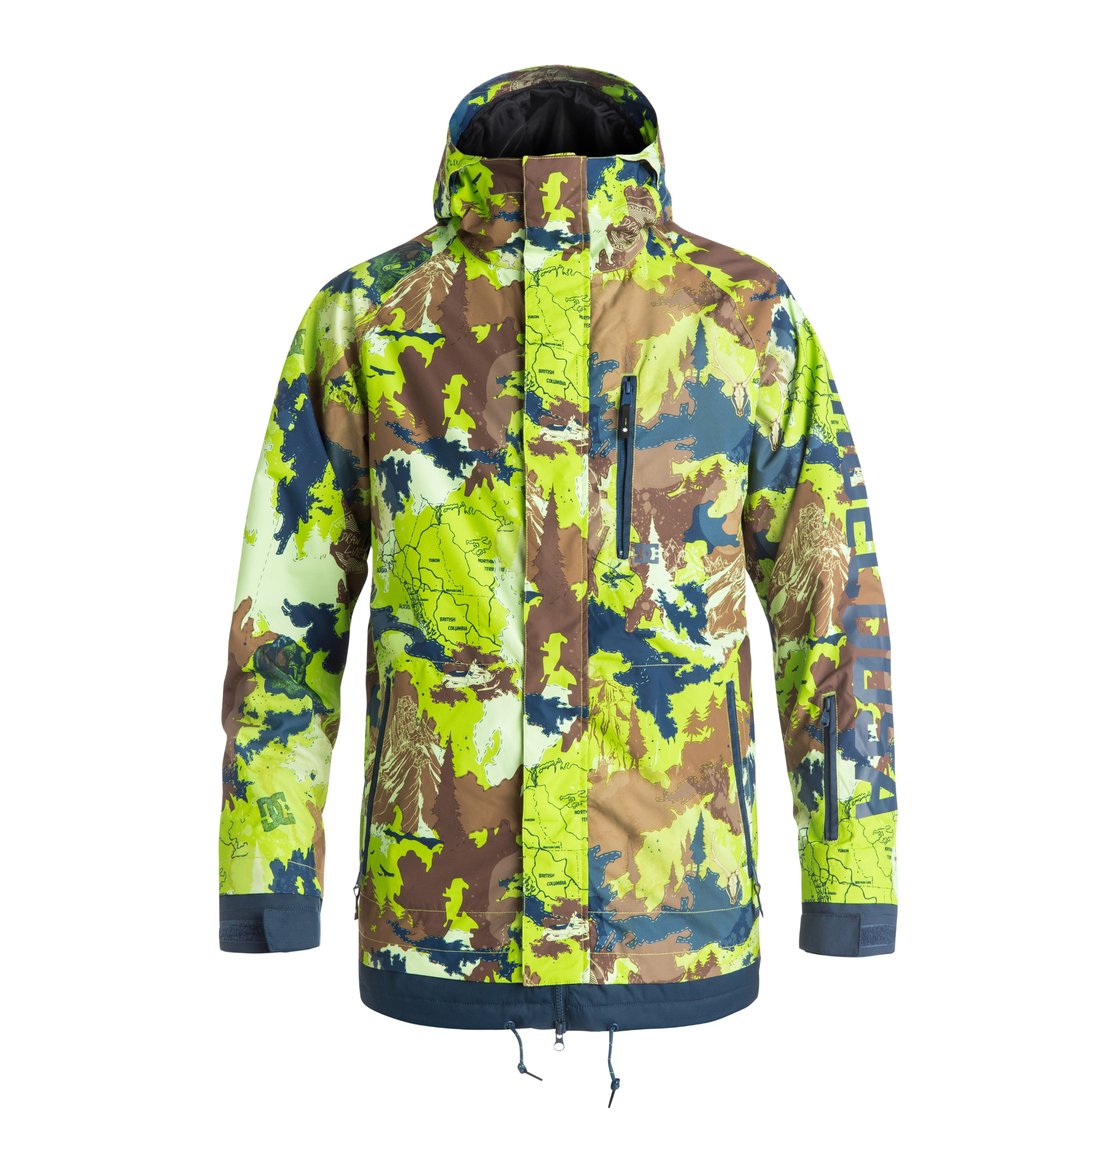 Giacca Snowboard Uomo Replay colore Fantasia - Dc Shoes 